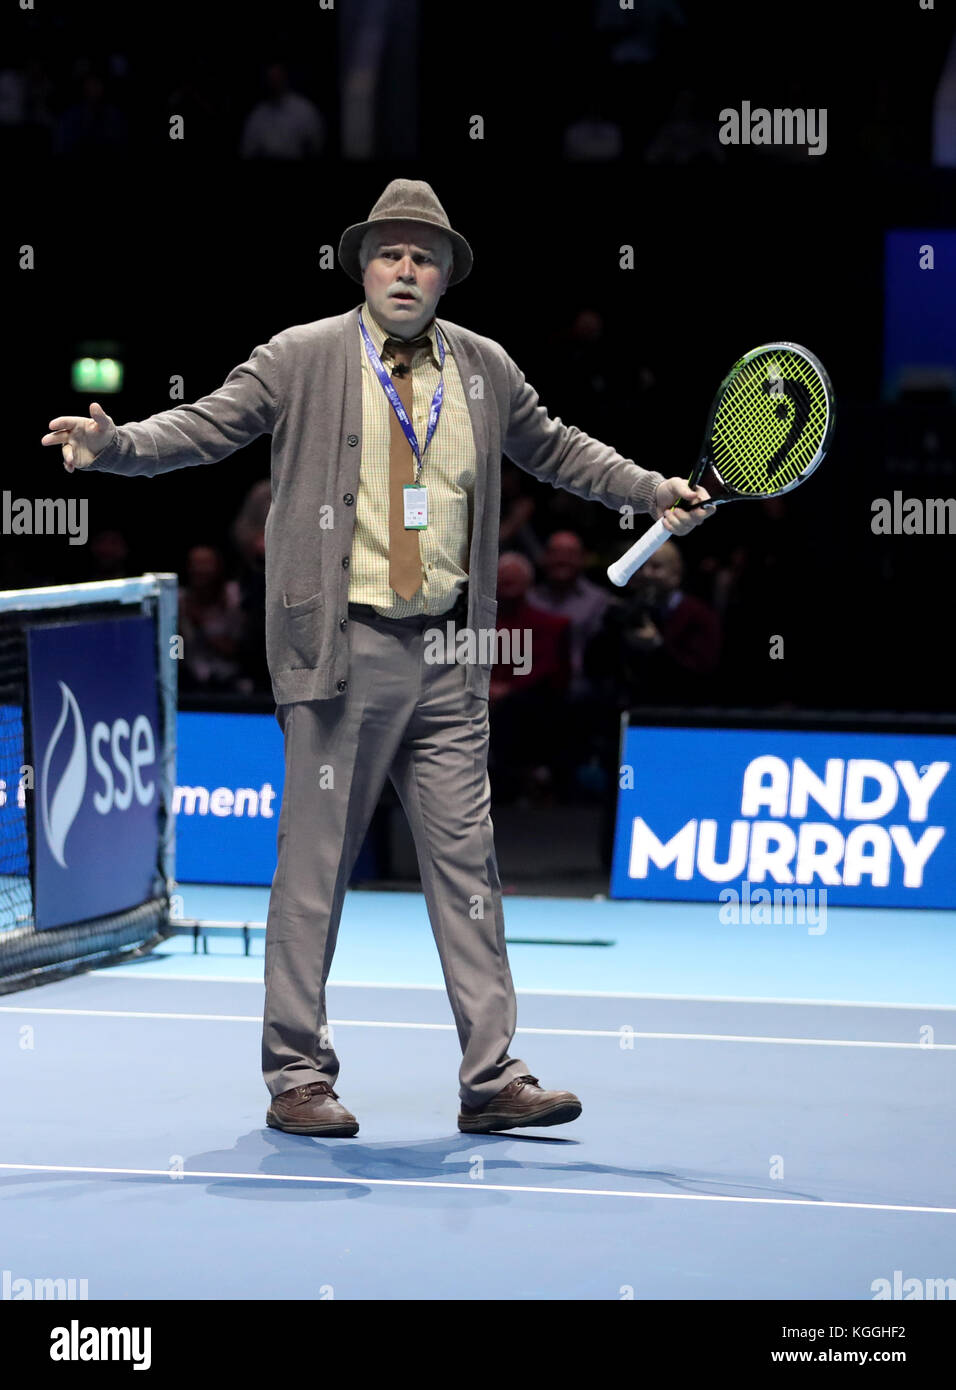 Jack from the television show Still Game on court during the doubles match at the Andy Murray Live Event at the SSE Hydro, Glasgow Stock Photo